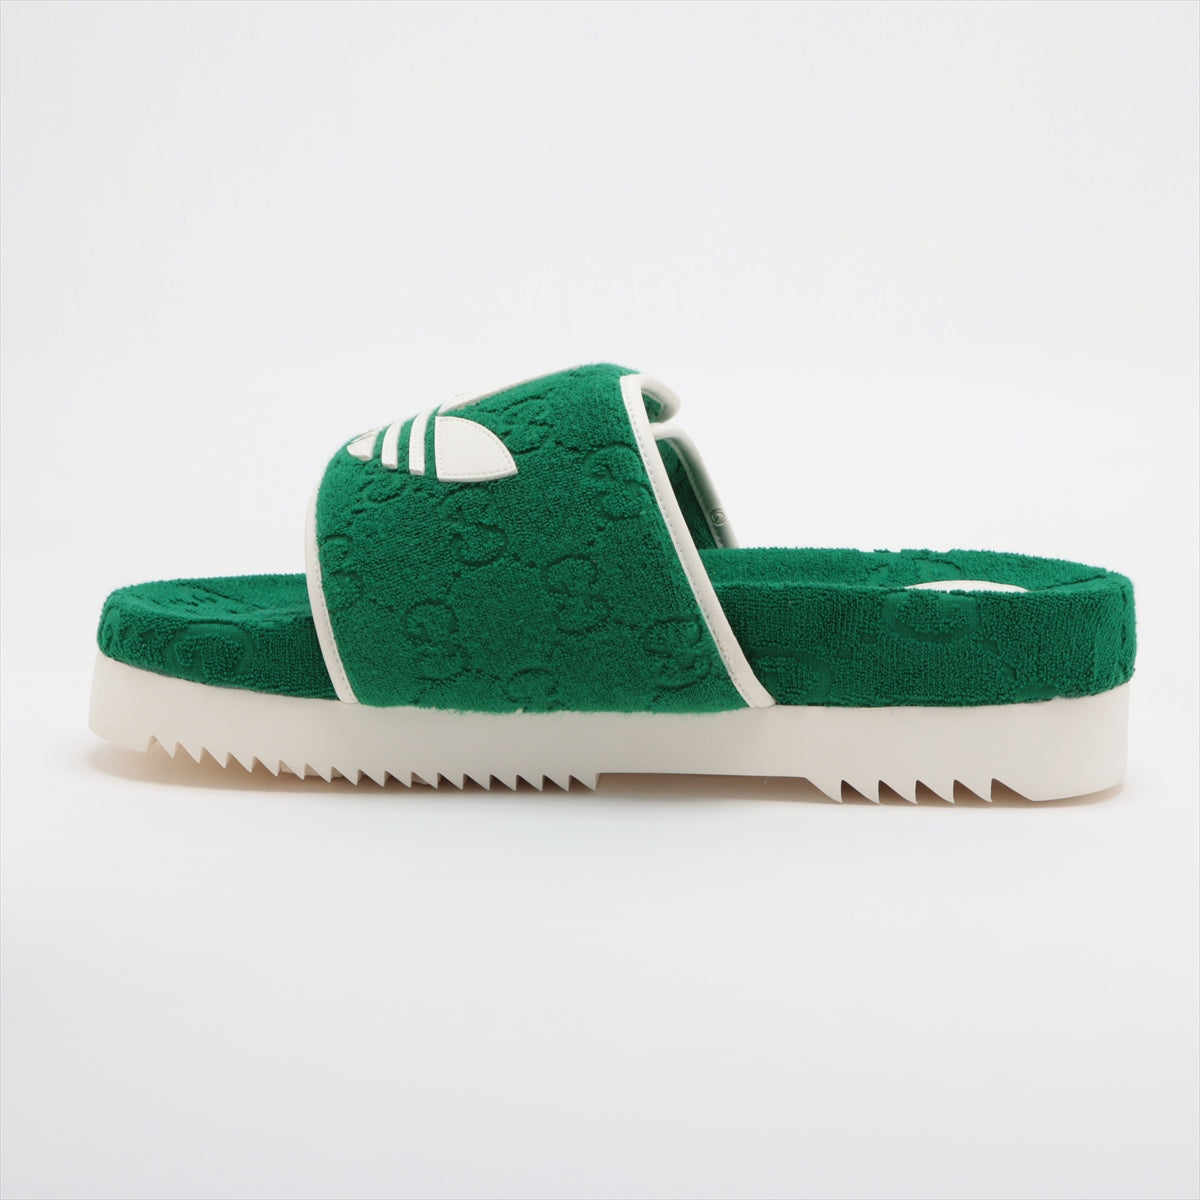 Gucci x adidas Cotton & leather Sandals Unknown size Men's Green